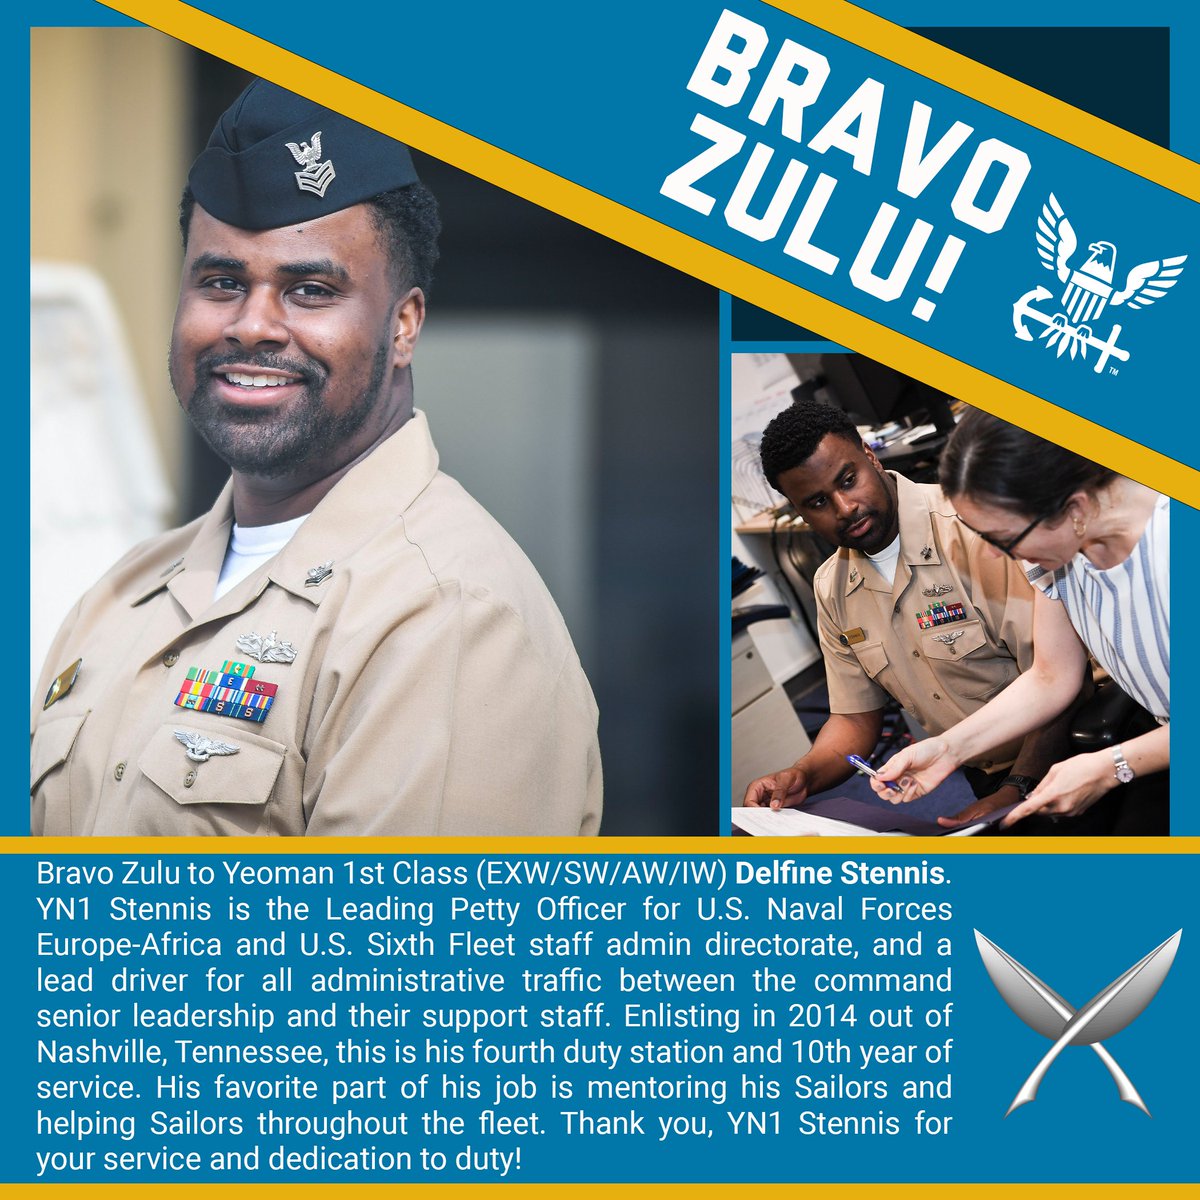 ⚓ Bravo Zulu to Yeoman 1st Class (EXW/SW/AW/IW) Delfine Stennis! YN1 Stennis is the Leading Petty Officer for U.S. Naval Forces Europe-Africa and U.S. Sixth Fleet staff admin directorate, and a lead driver for all administrative traffic between the command senior leadership and…